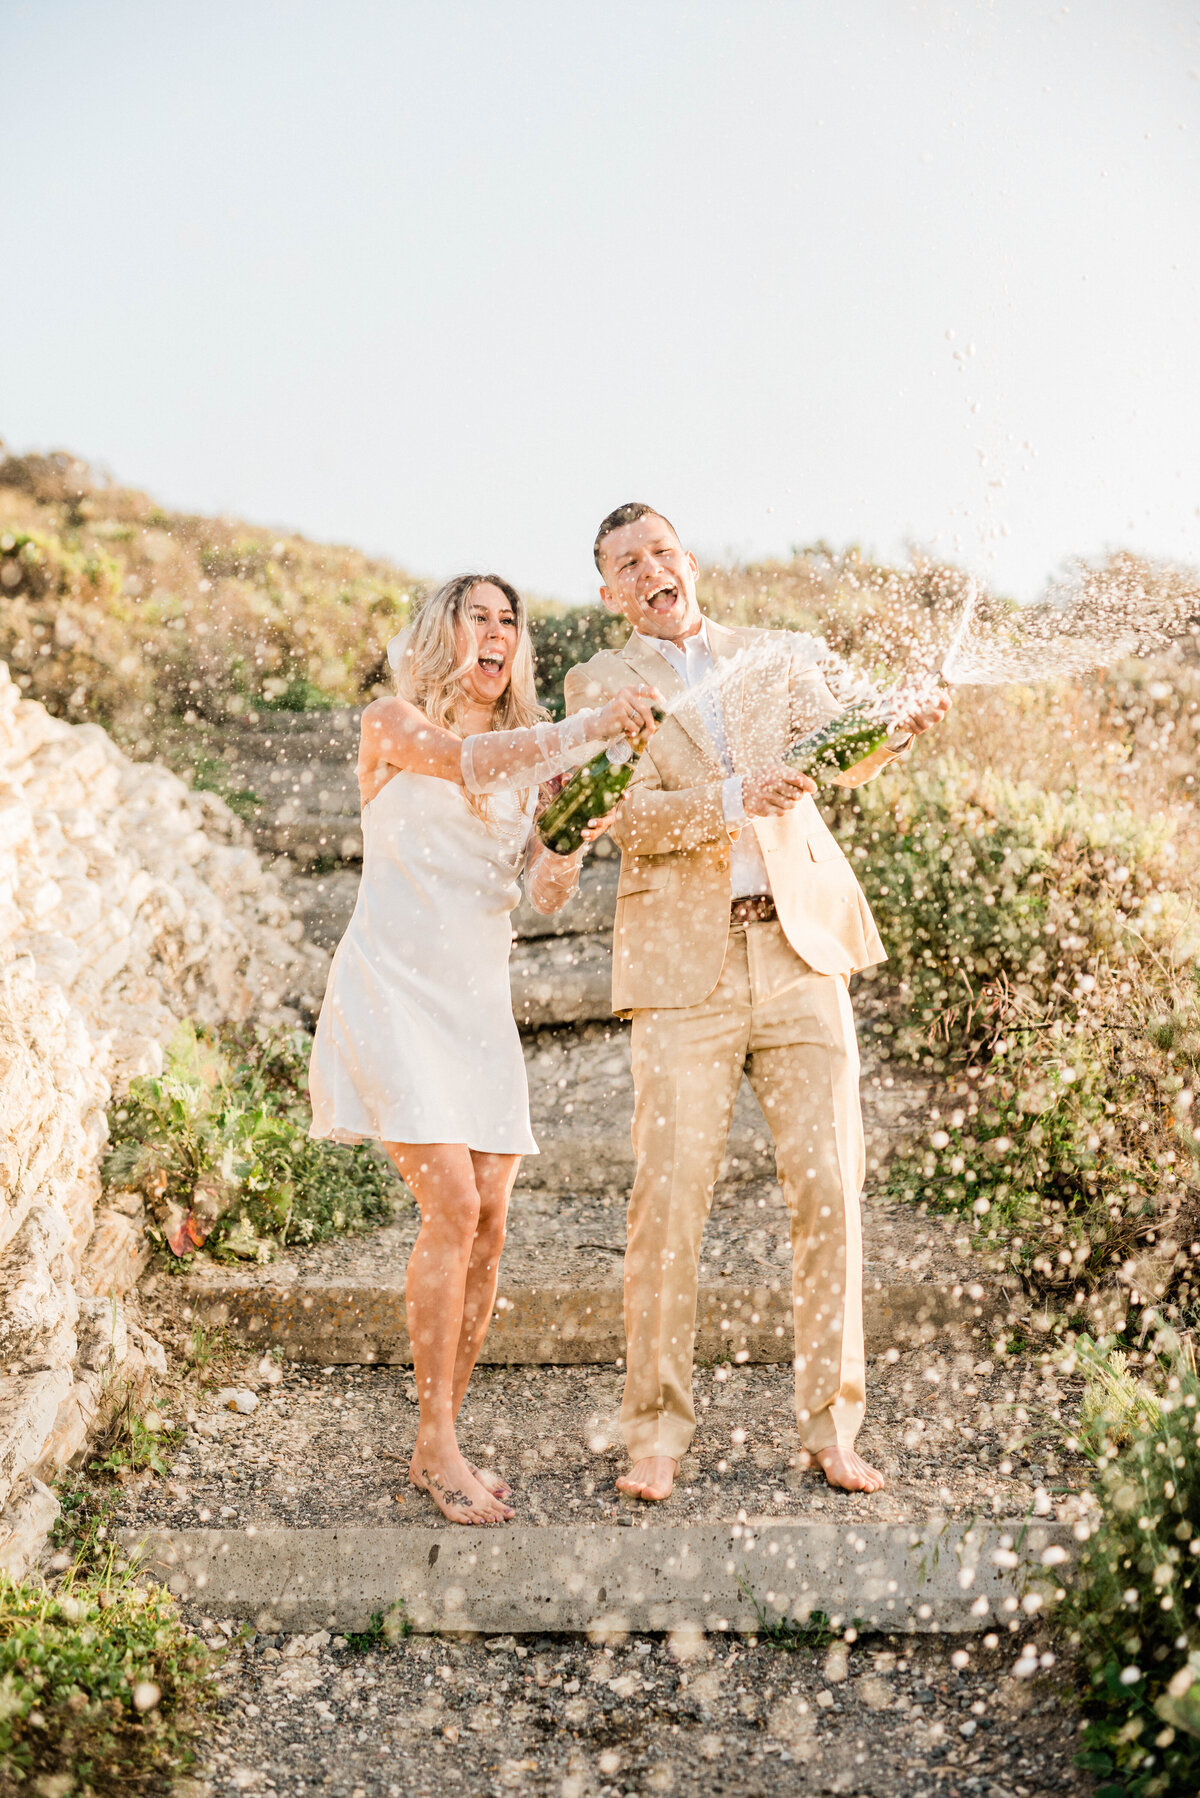 Engaged couple open a bottle of Champagne for a toast at their Montana de Oro engagement session. They happily spray Champagne and kiss.